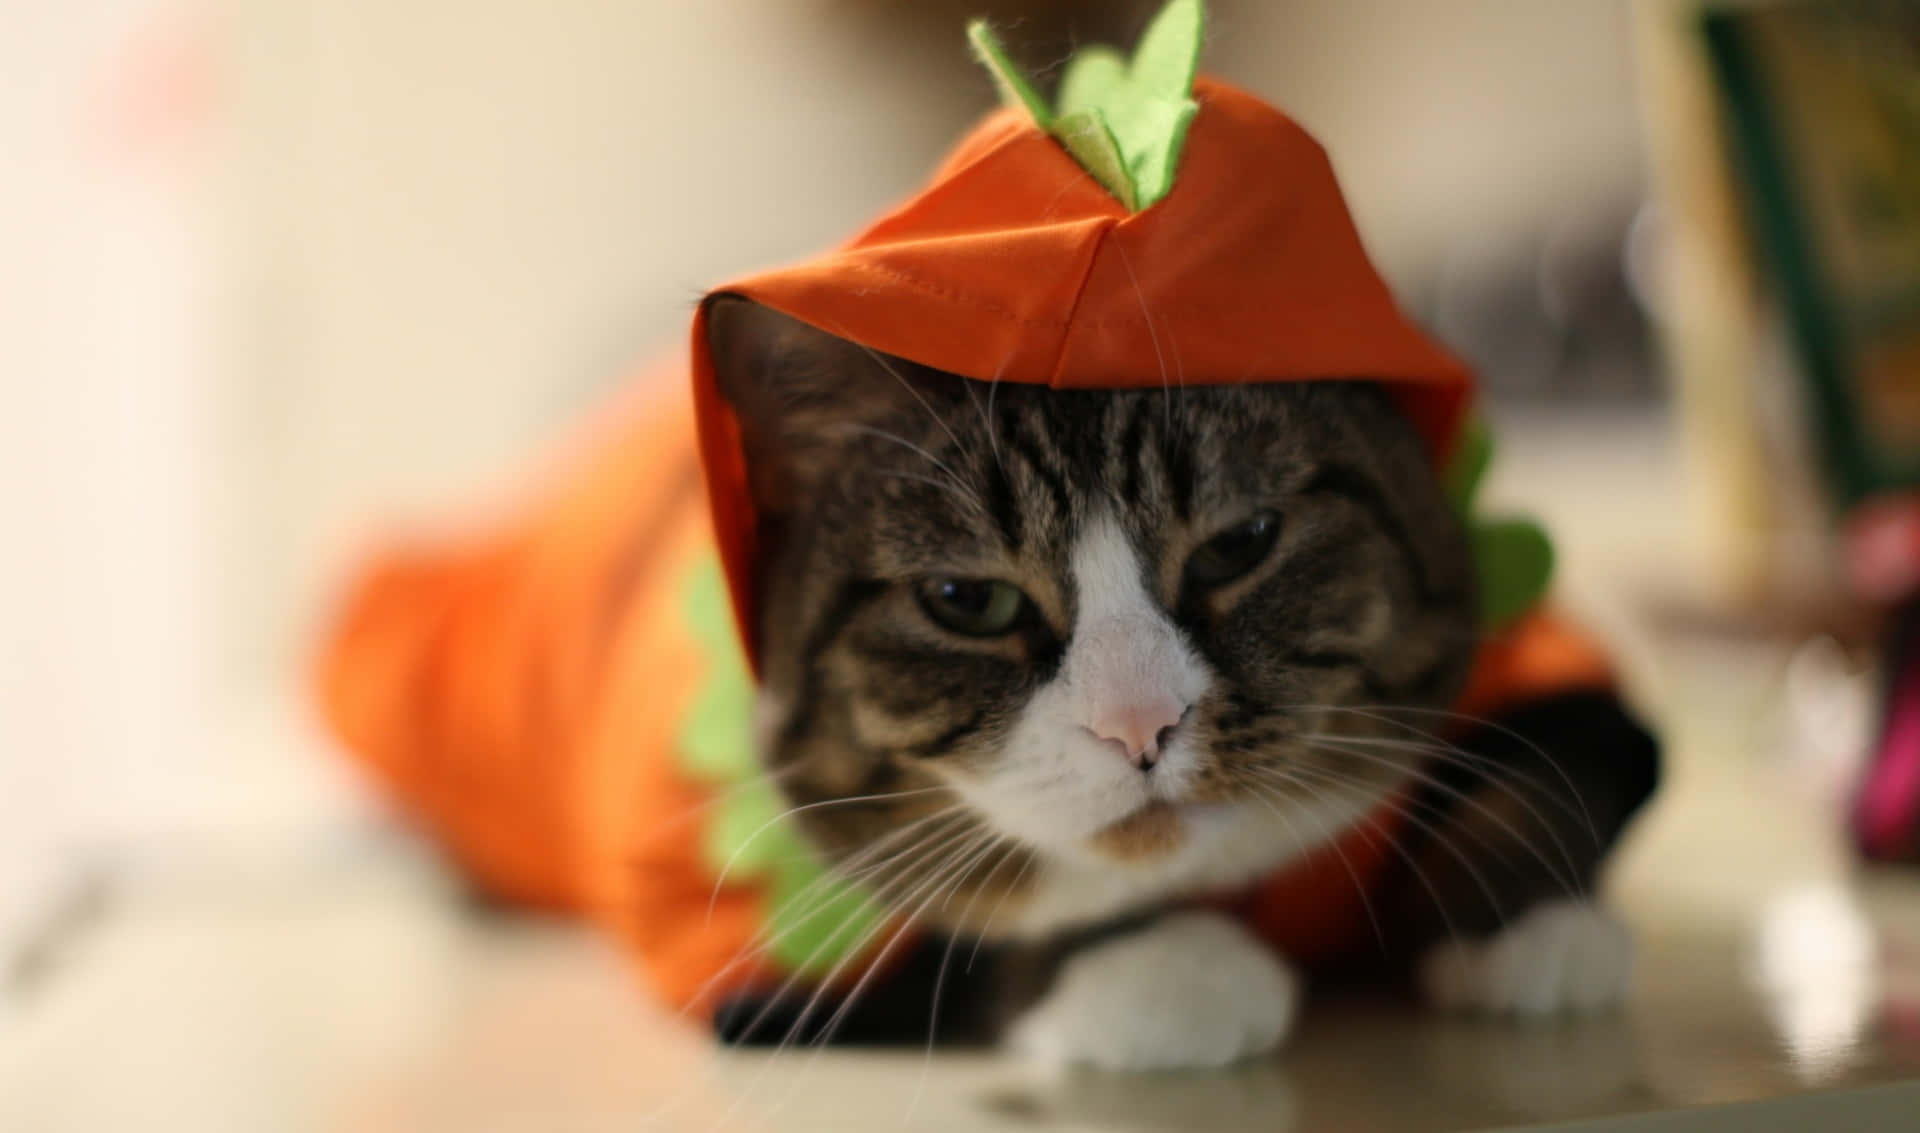 Get into the Halloween spirit with this adorable little cat!